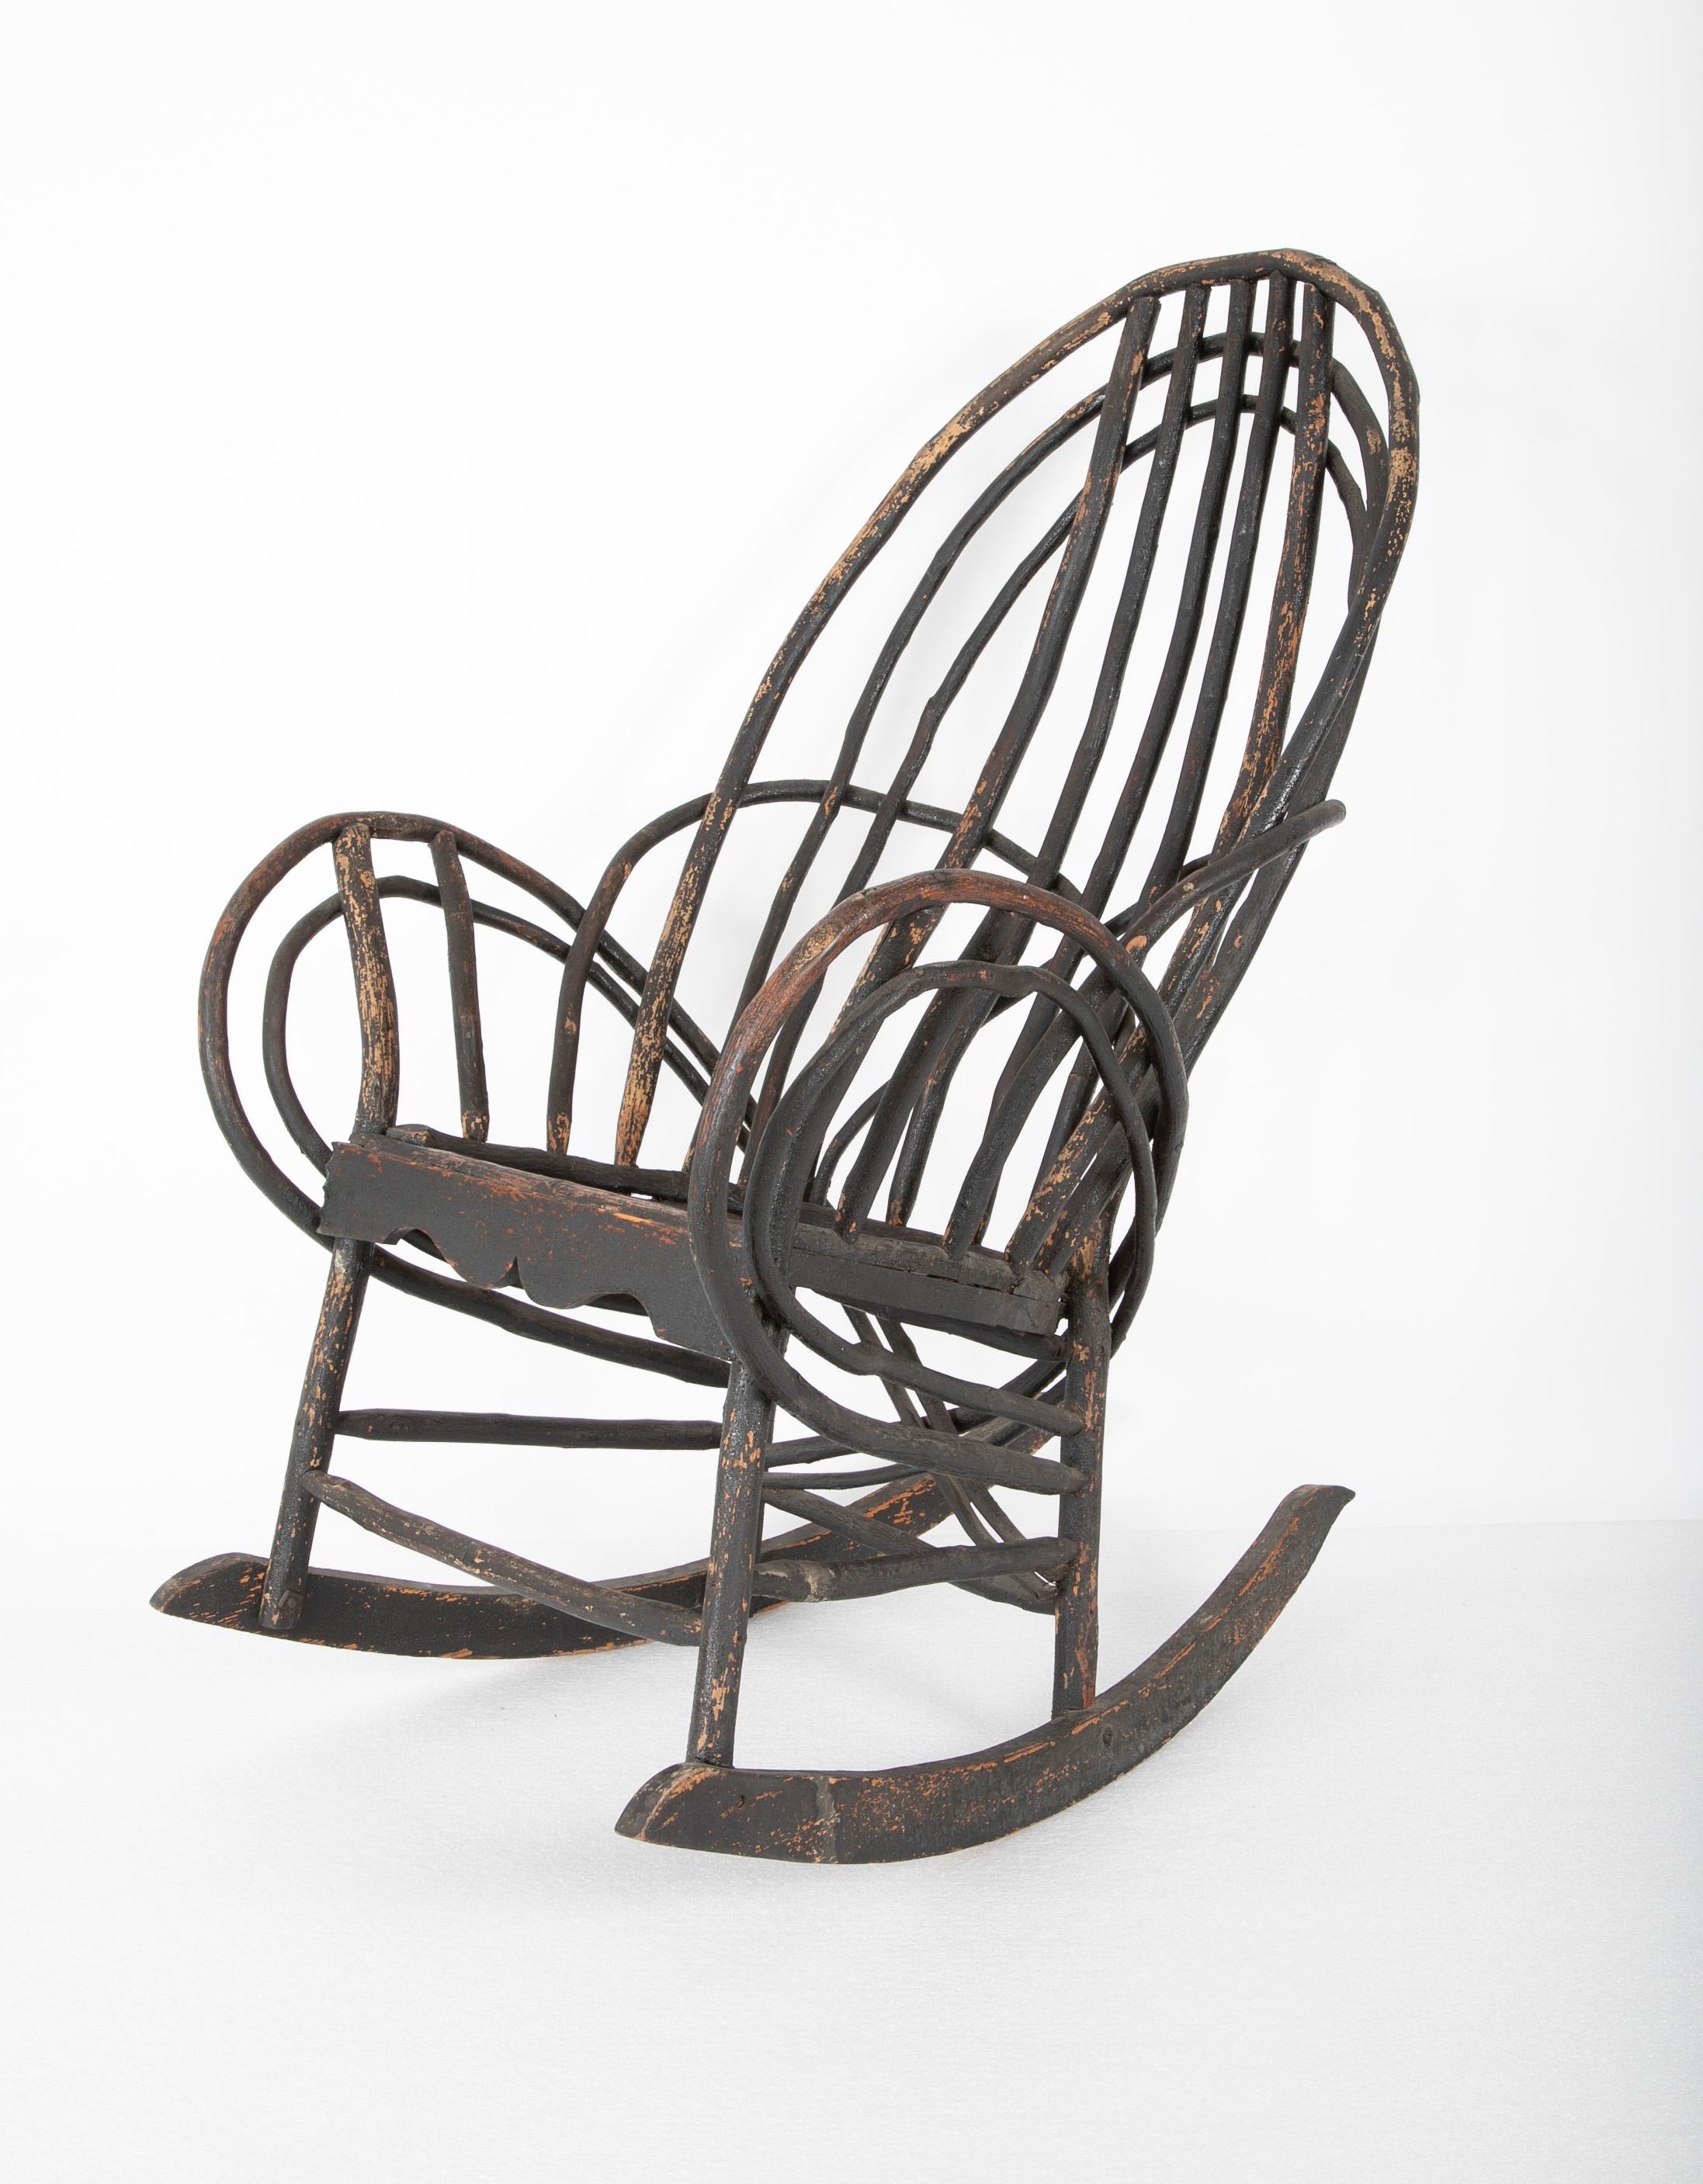 Bentwood rustic armchair-rocker with plank seat & traces of early black paint, American, early 20th century.

 